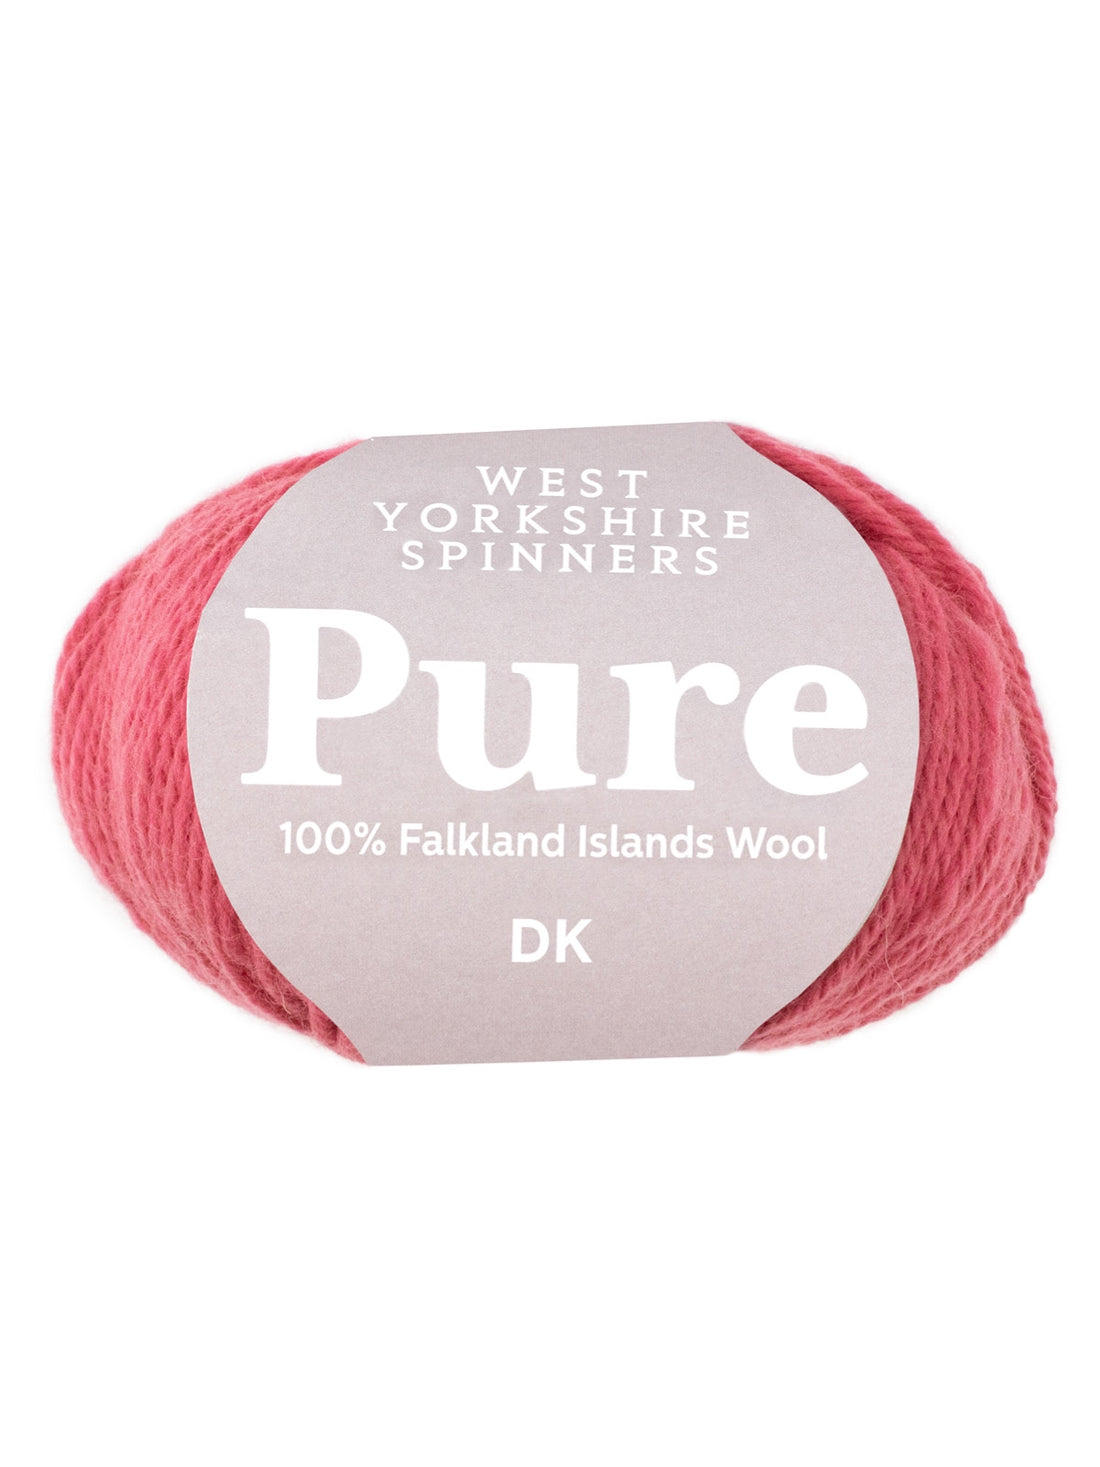 West Yorkshire Spinners Pure DK Yarn